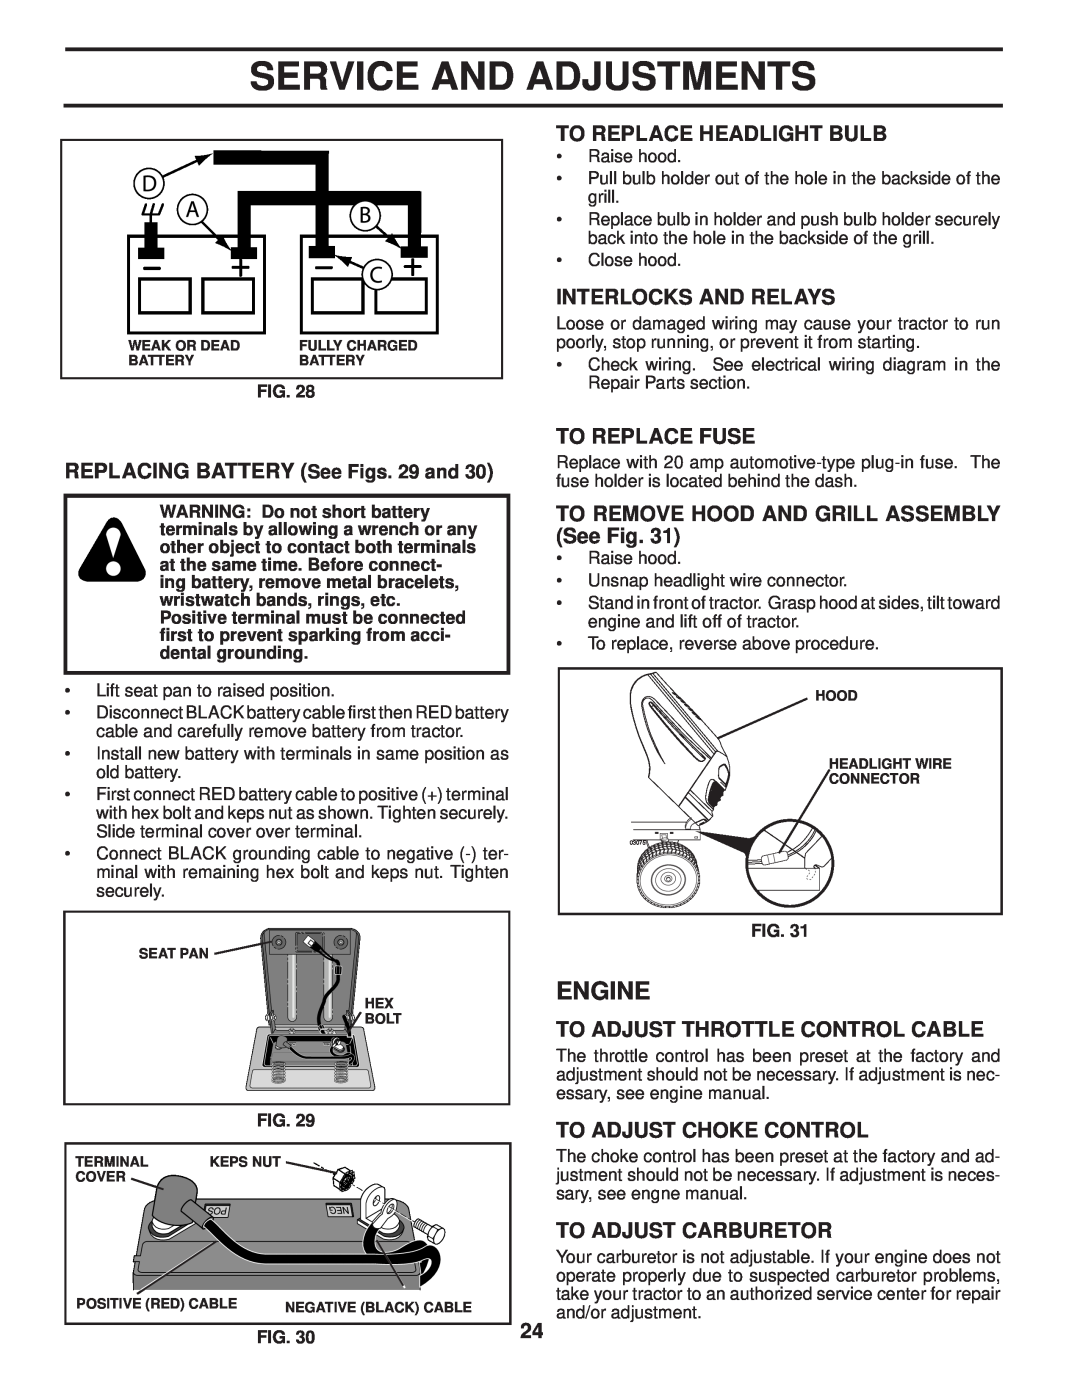 Poulan 411274 manual To Replace Headlight Bulb, Interlocks And Relays, REPLACING BATTERY See Figs. 29 and, To Replace Fuse 